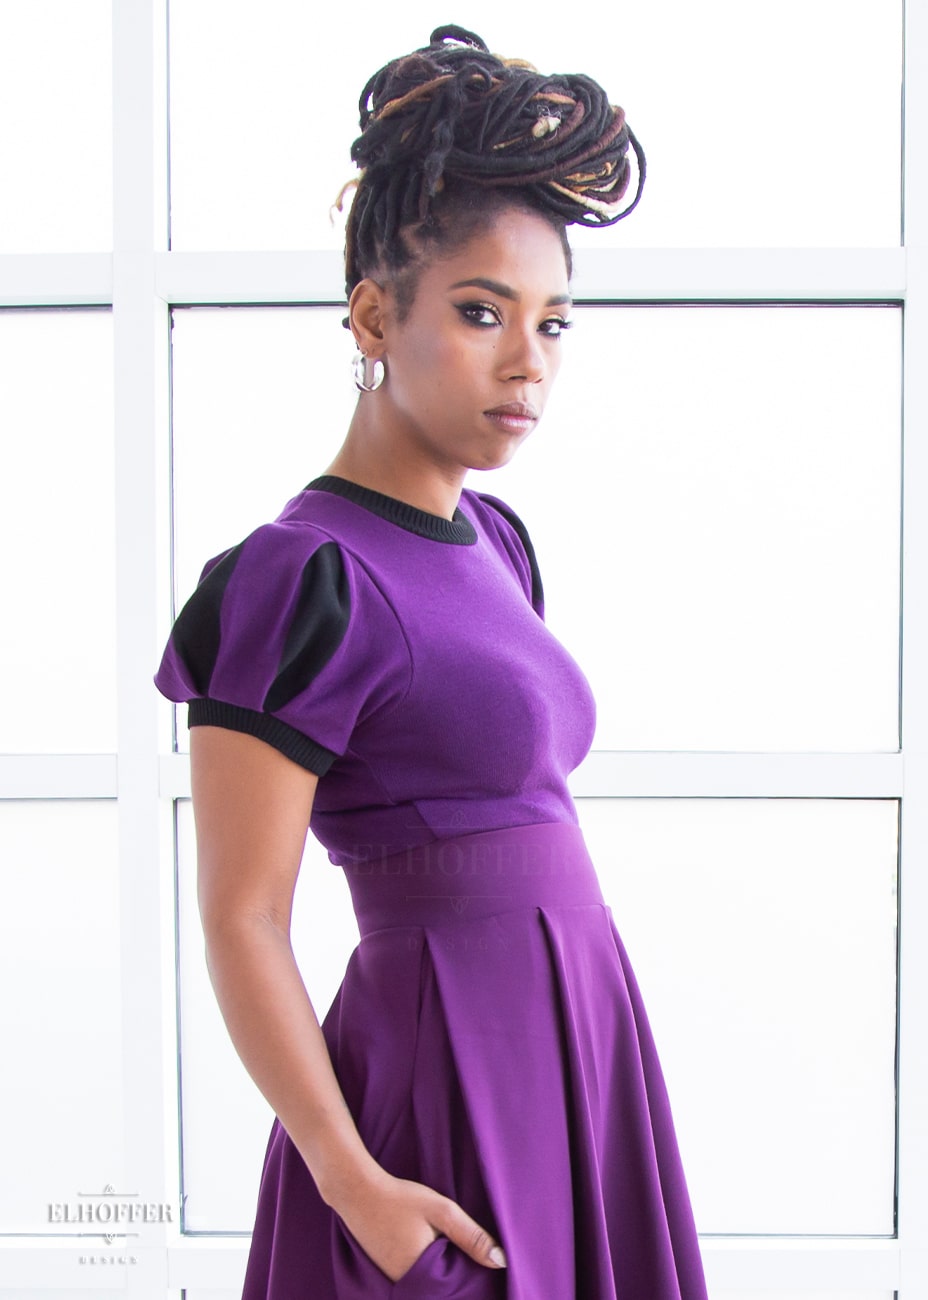 A side view of Krystina, a medium dark skinned S model with long braids in an updo, wearing a purple knit short sleeve crop top with black ribbing along neckline and cuffs.  The sleeves are split puff sleeves with alternating colors of purple and black. She paired the knit top with a plum skater skirt.